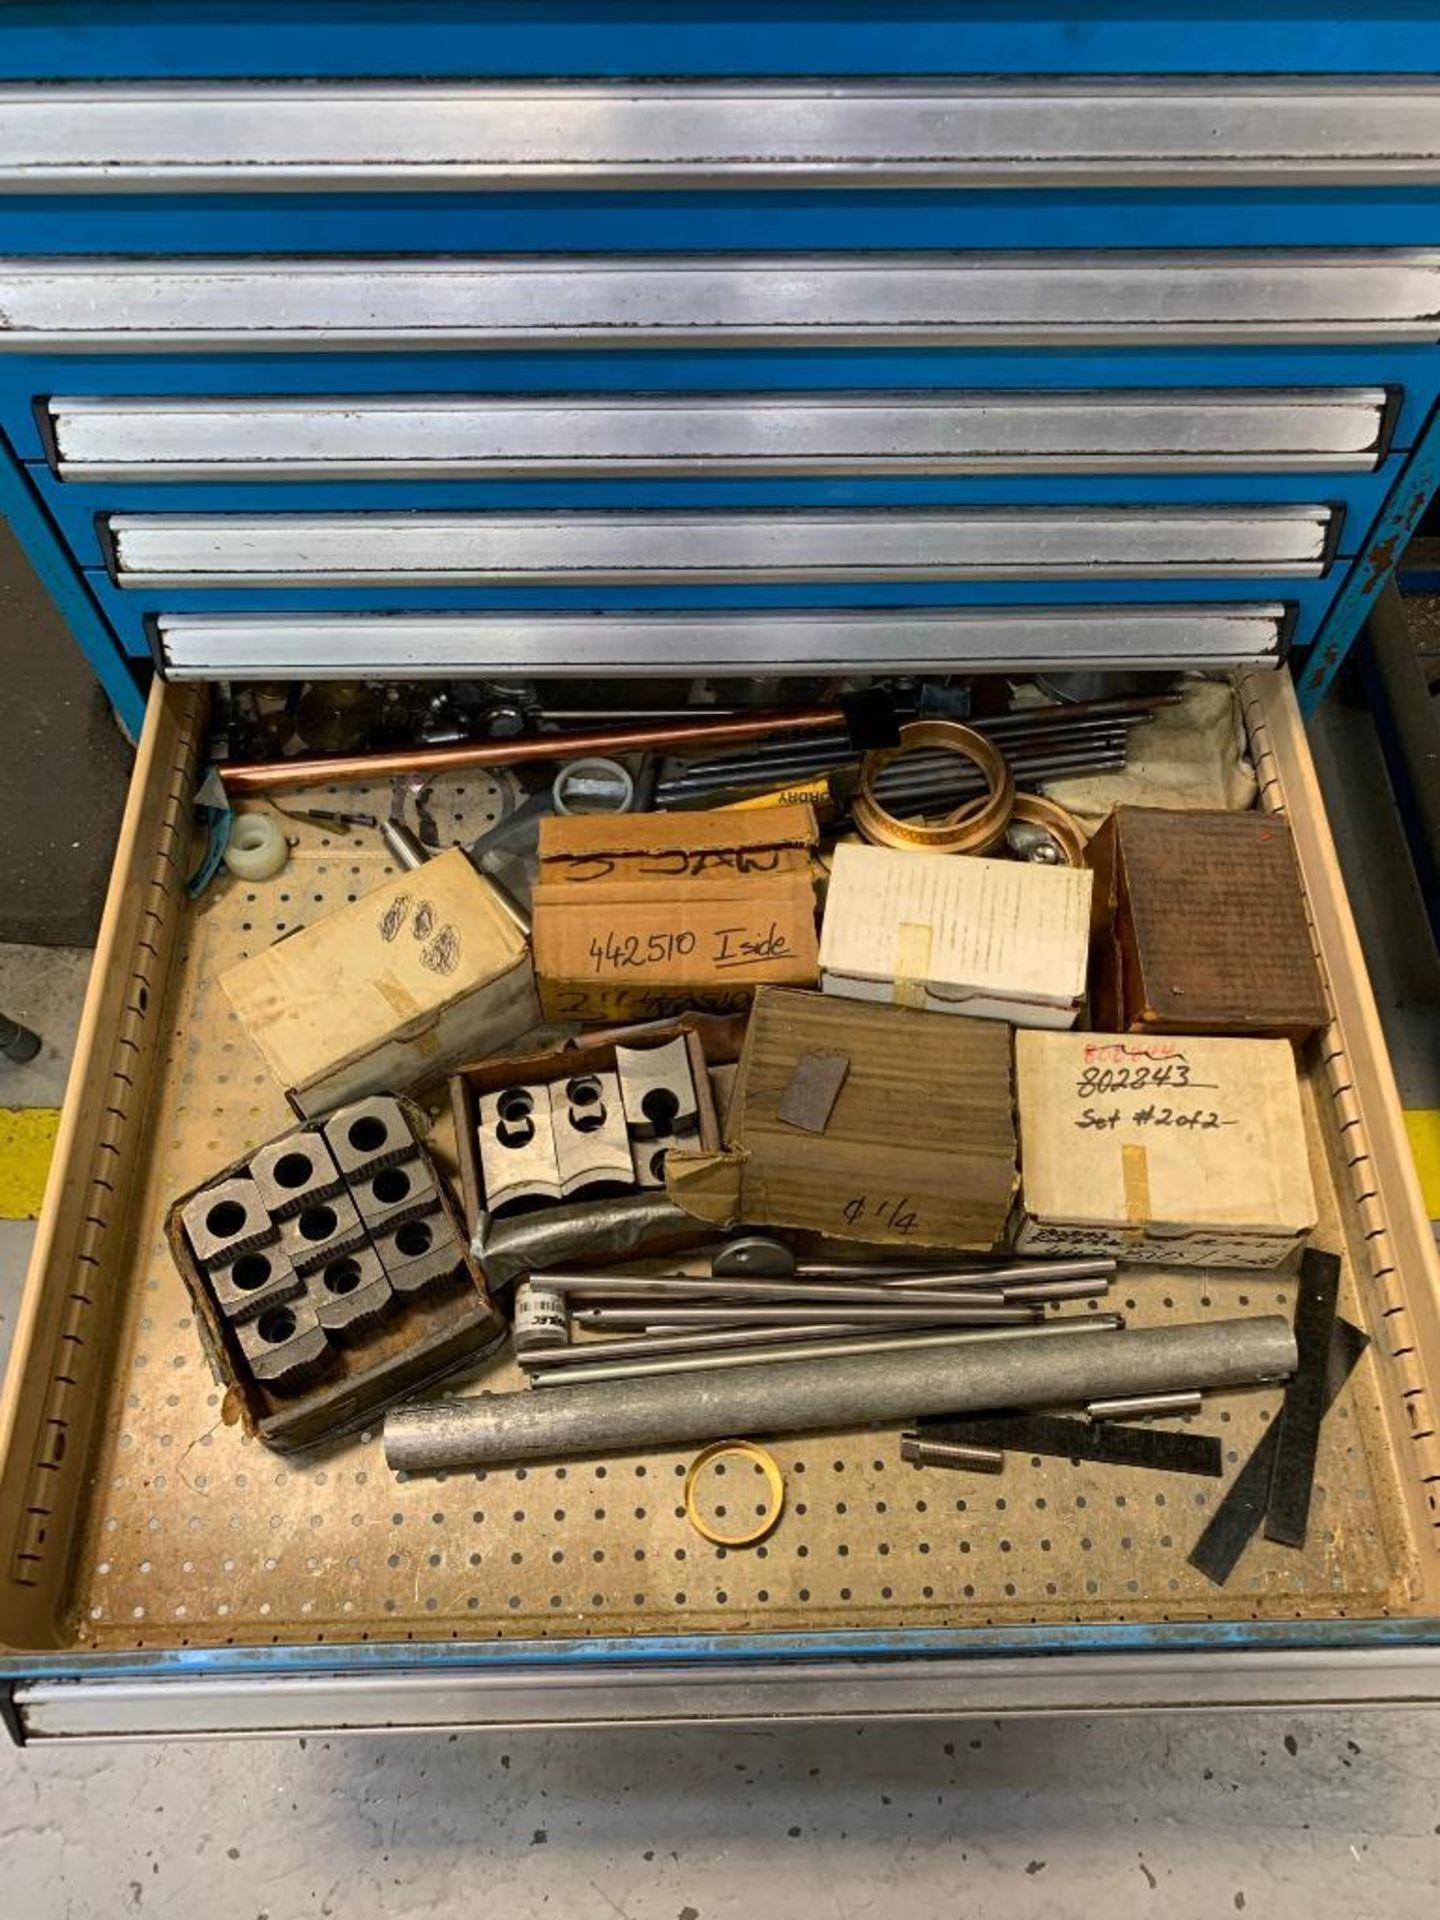 BOTT/KENNEDY TOOL CABINET, OTHER CABINET, CART W/ MAZAK TOOLING, INSERTS - Image 11 of 16